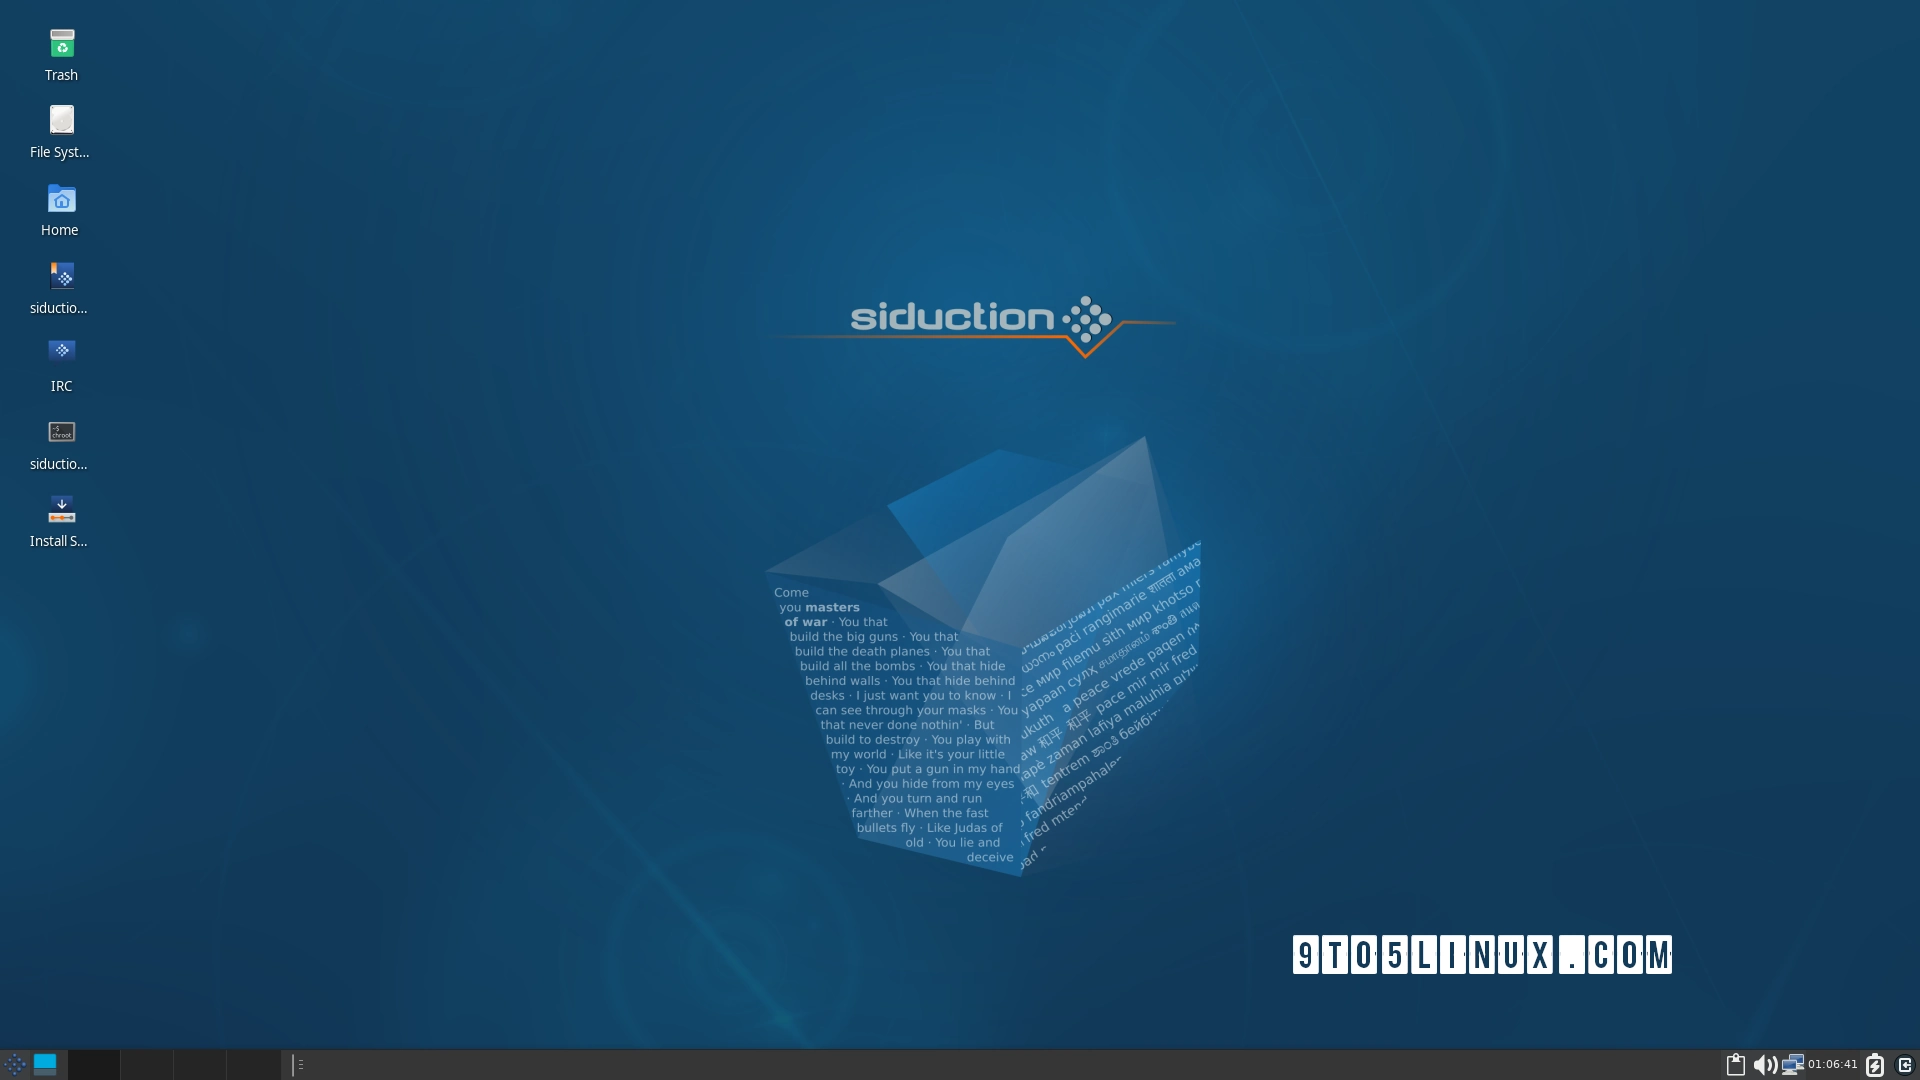 Debian-Based siduction 2022.1 Arrives with Linux Kernel 6.1, Xfce 4.18, and LXQt 1.2